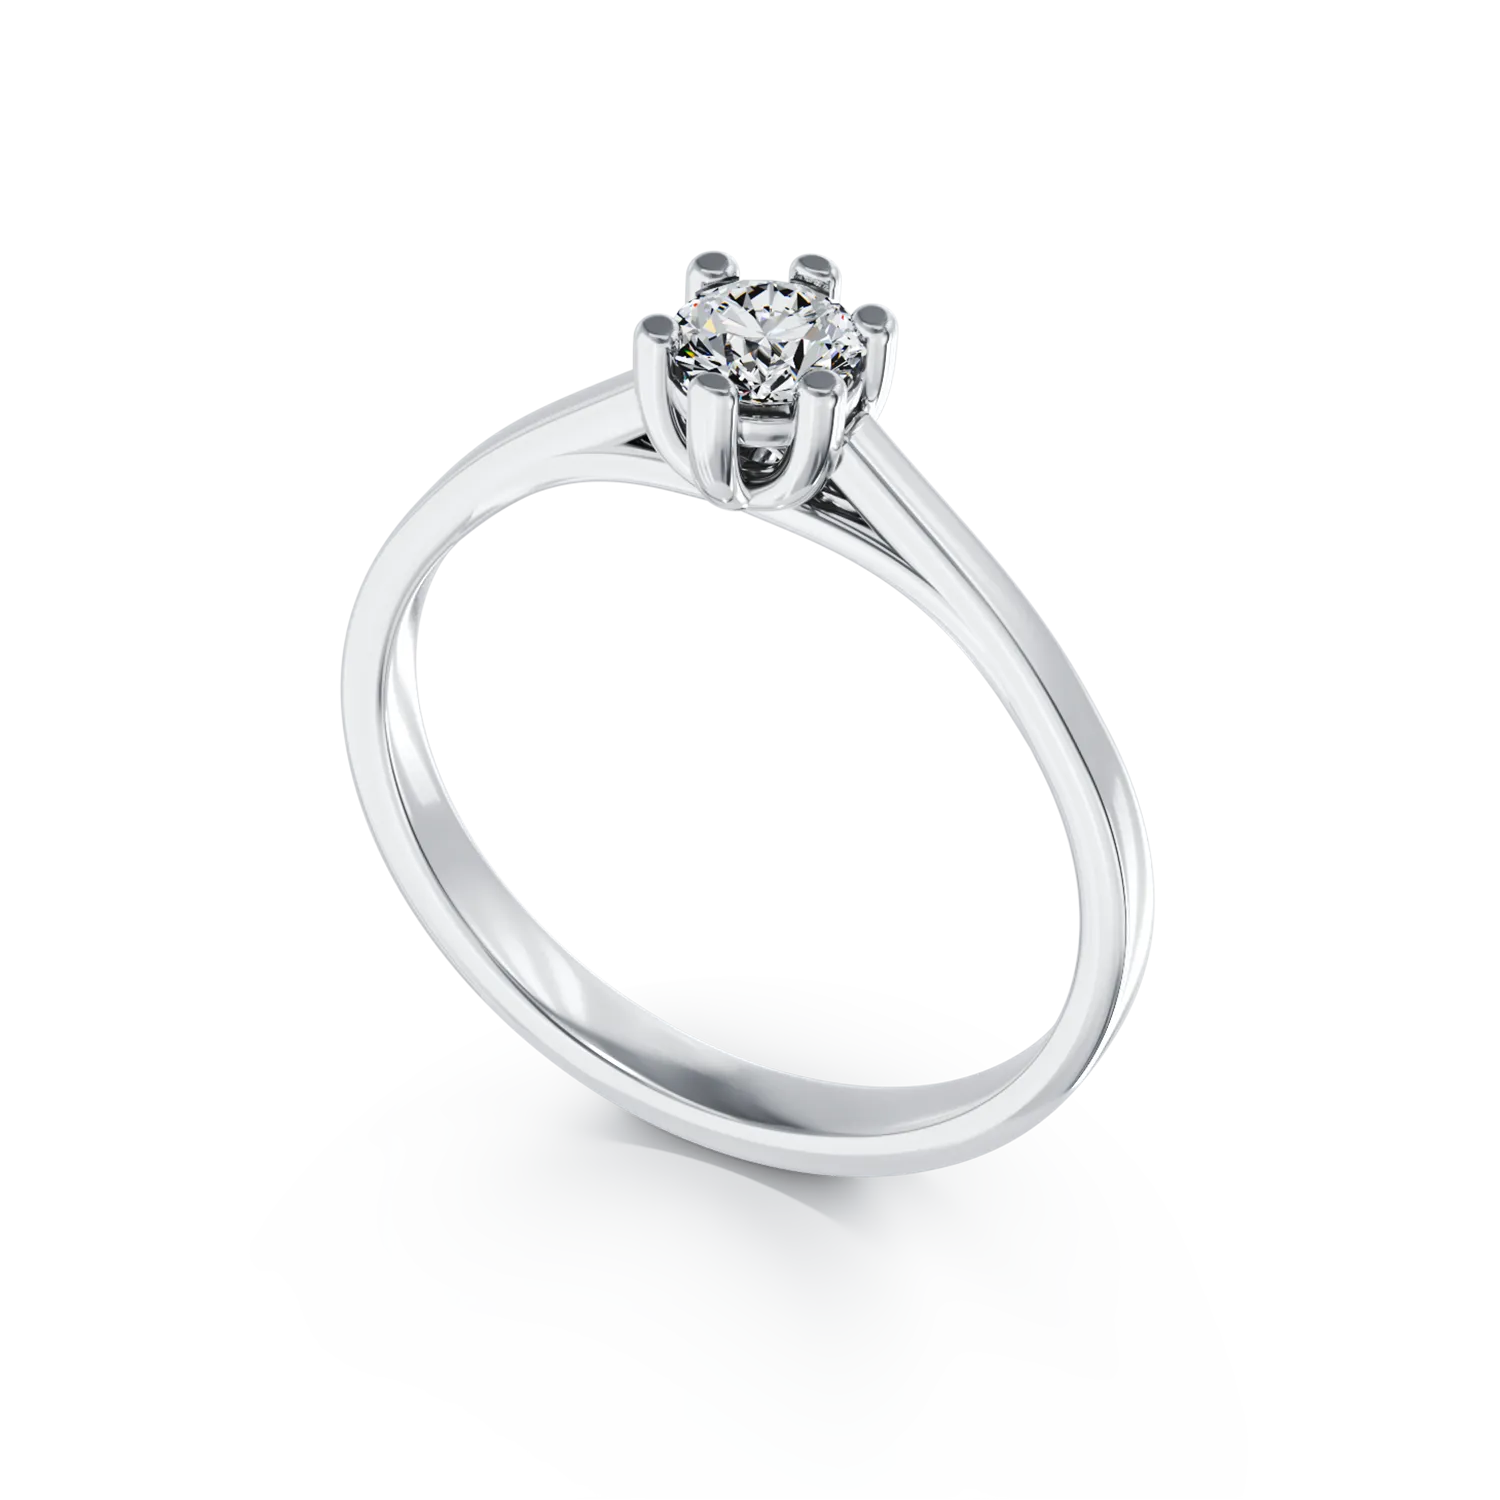 18K white gold engagement ring with a 0.34ct solitaire diamond